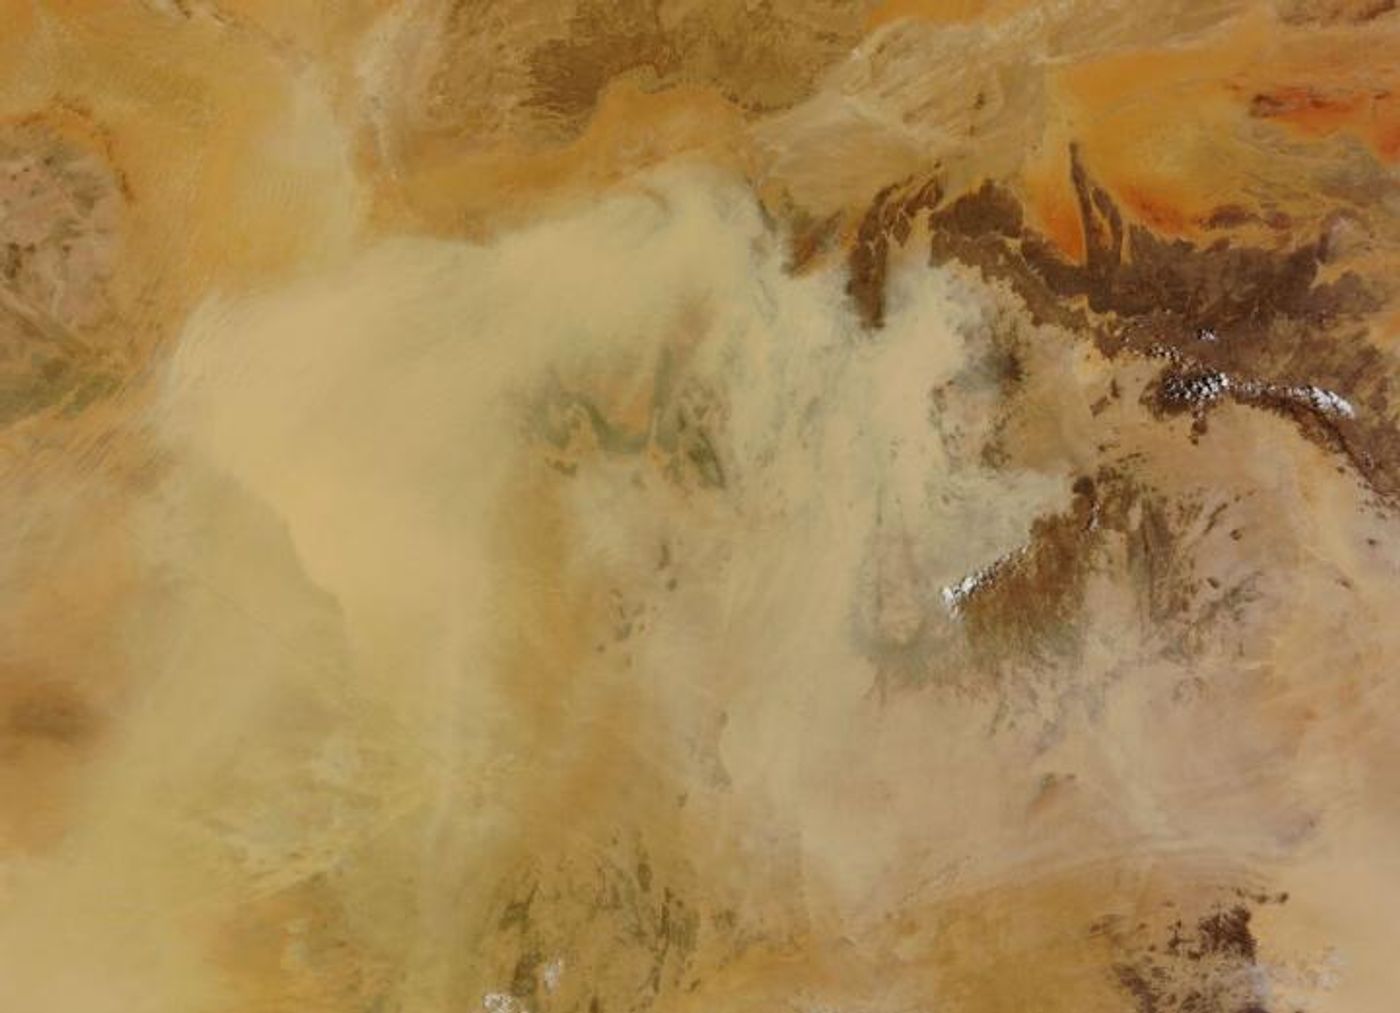  Viruses and bacteria fall back to Earth via dust storms and precipitation. Saharan dust intrusions from North Africa and rains from the Atlantic. / Credit: NASA Visible Earth